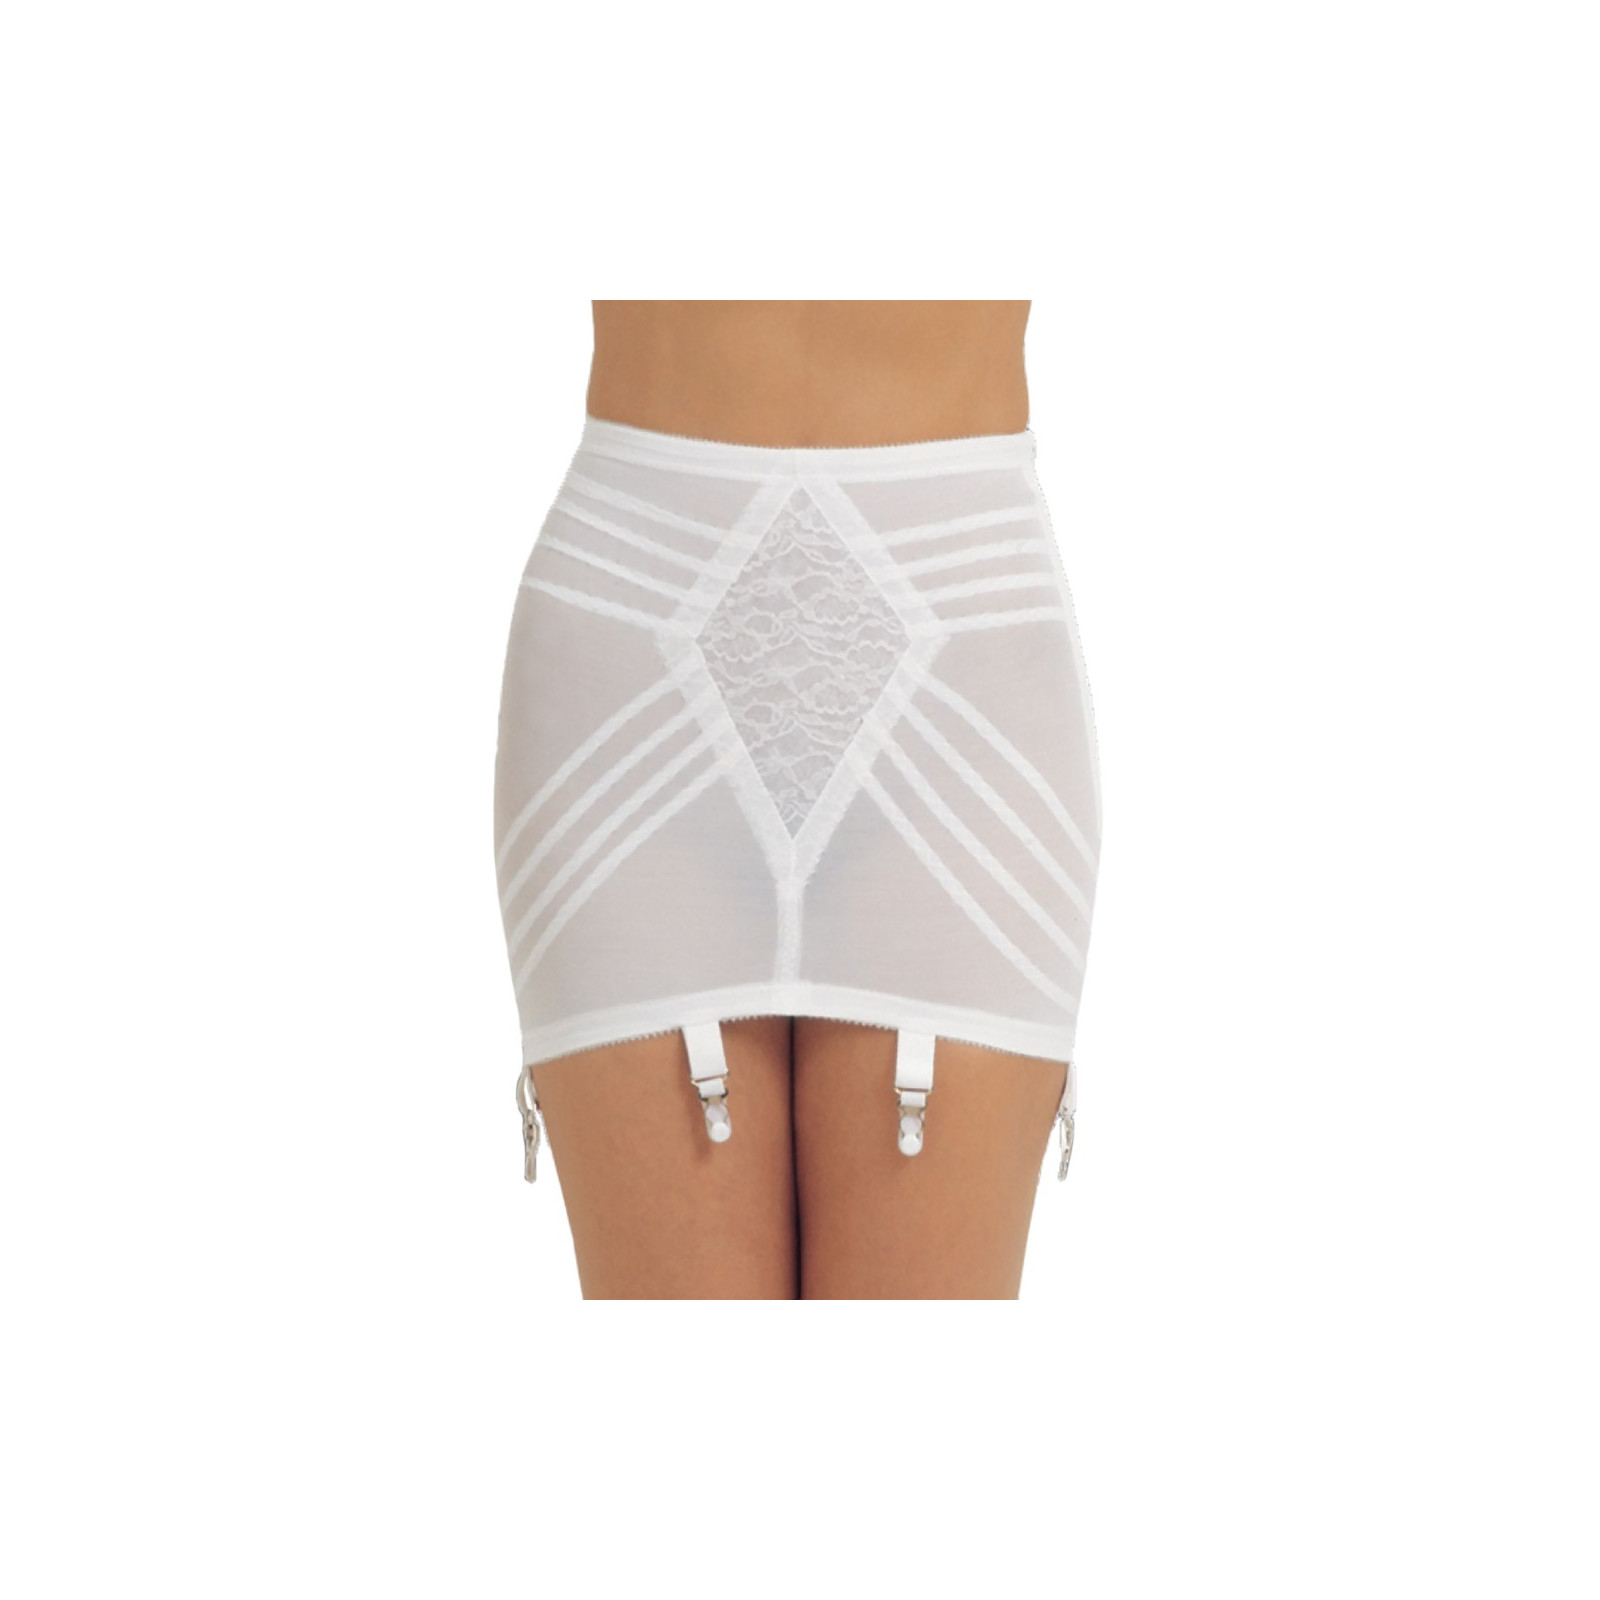 Rago Style 1359 - Open Bottom Girdle Firm Shaping, Beige, 38 - Import It All